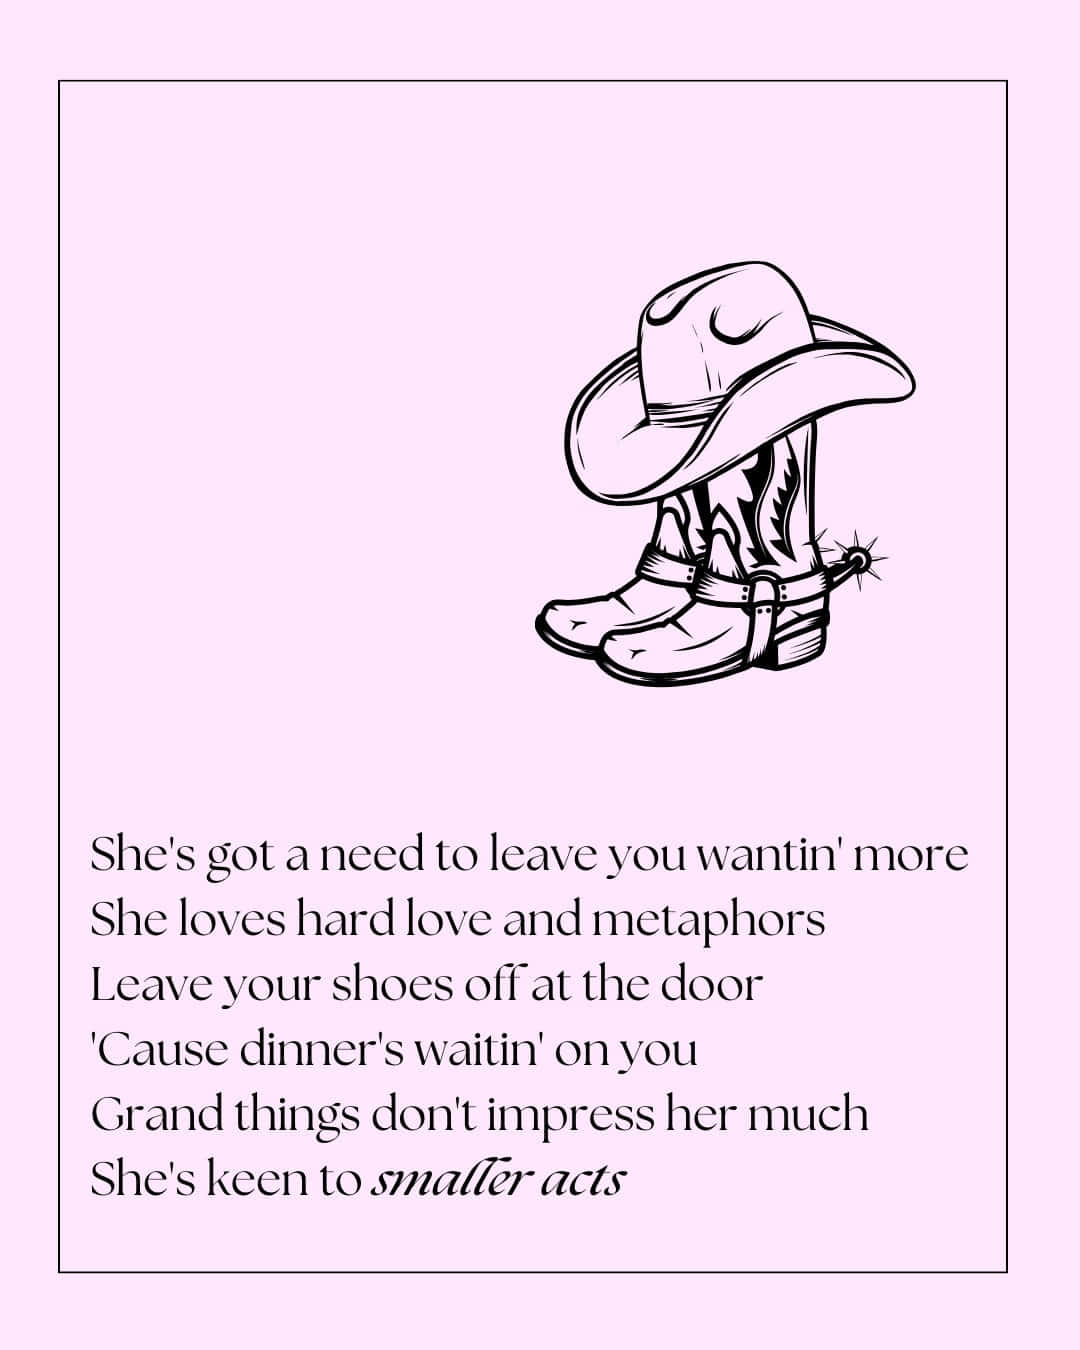 Cowboy Hatand Boots Illustrationwith Quotes Wallpaper